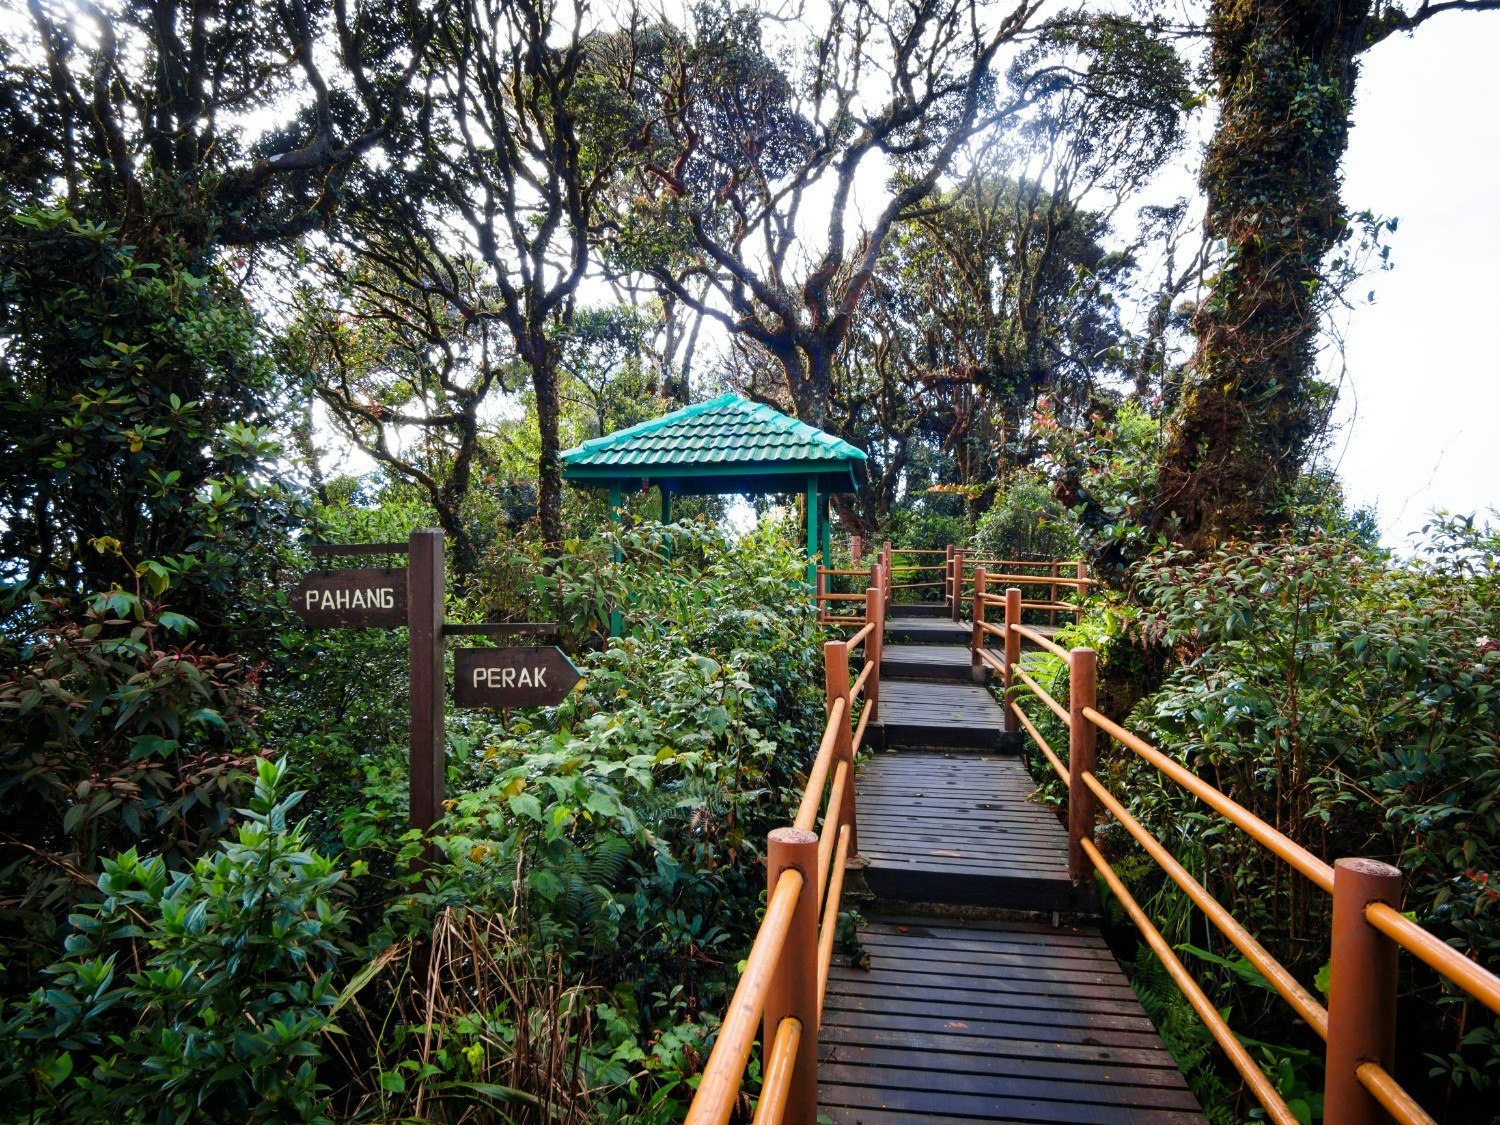 Ridge-top walkway through the Mossy Forest in Malaysia